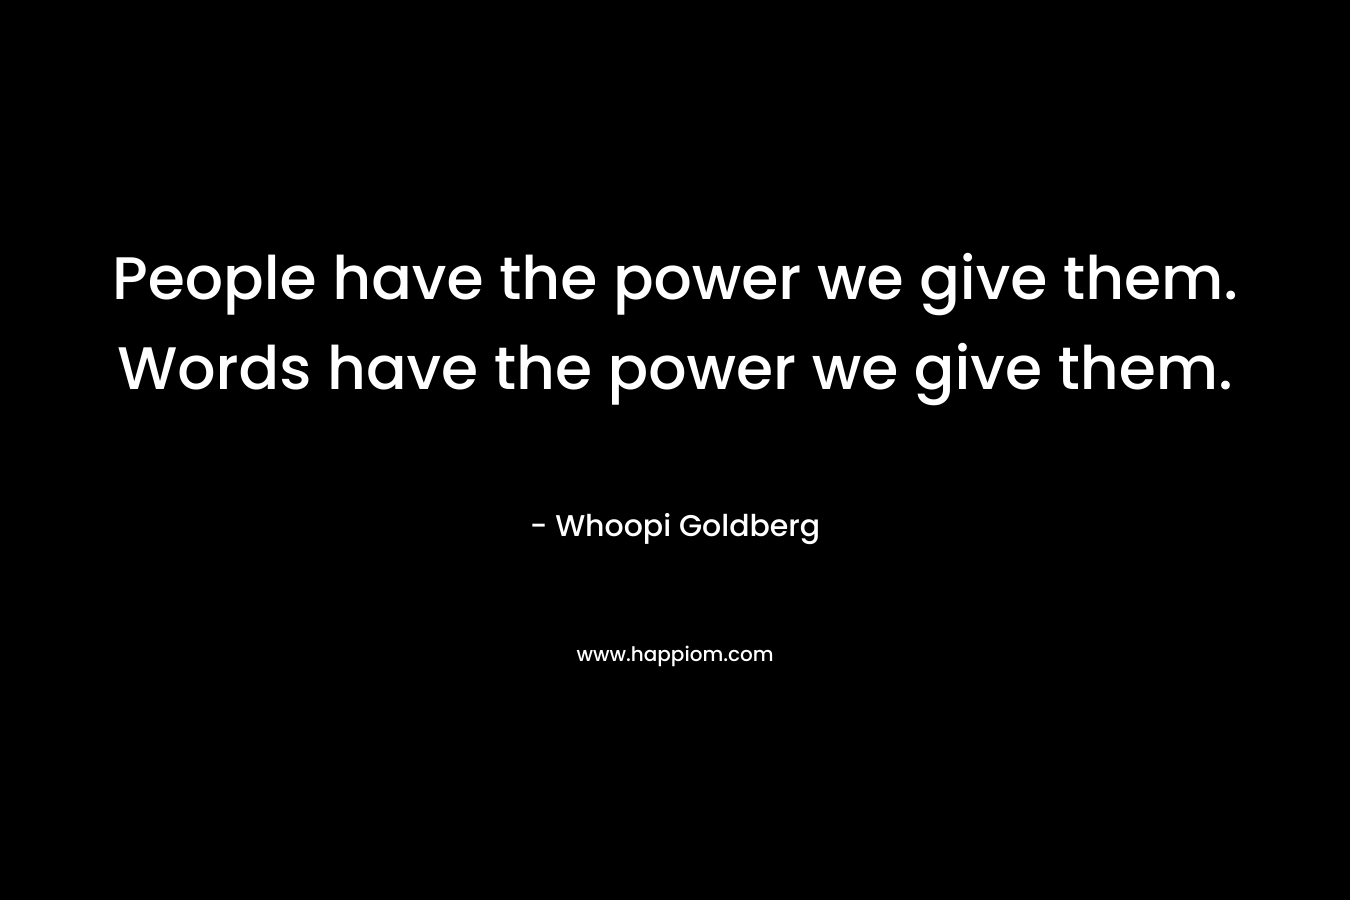 People have the power we give them. Words have the power we give them. – Whoopi Goldberg